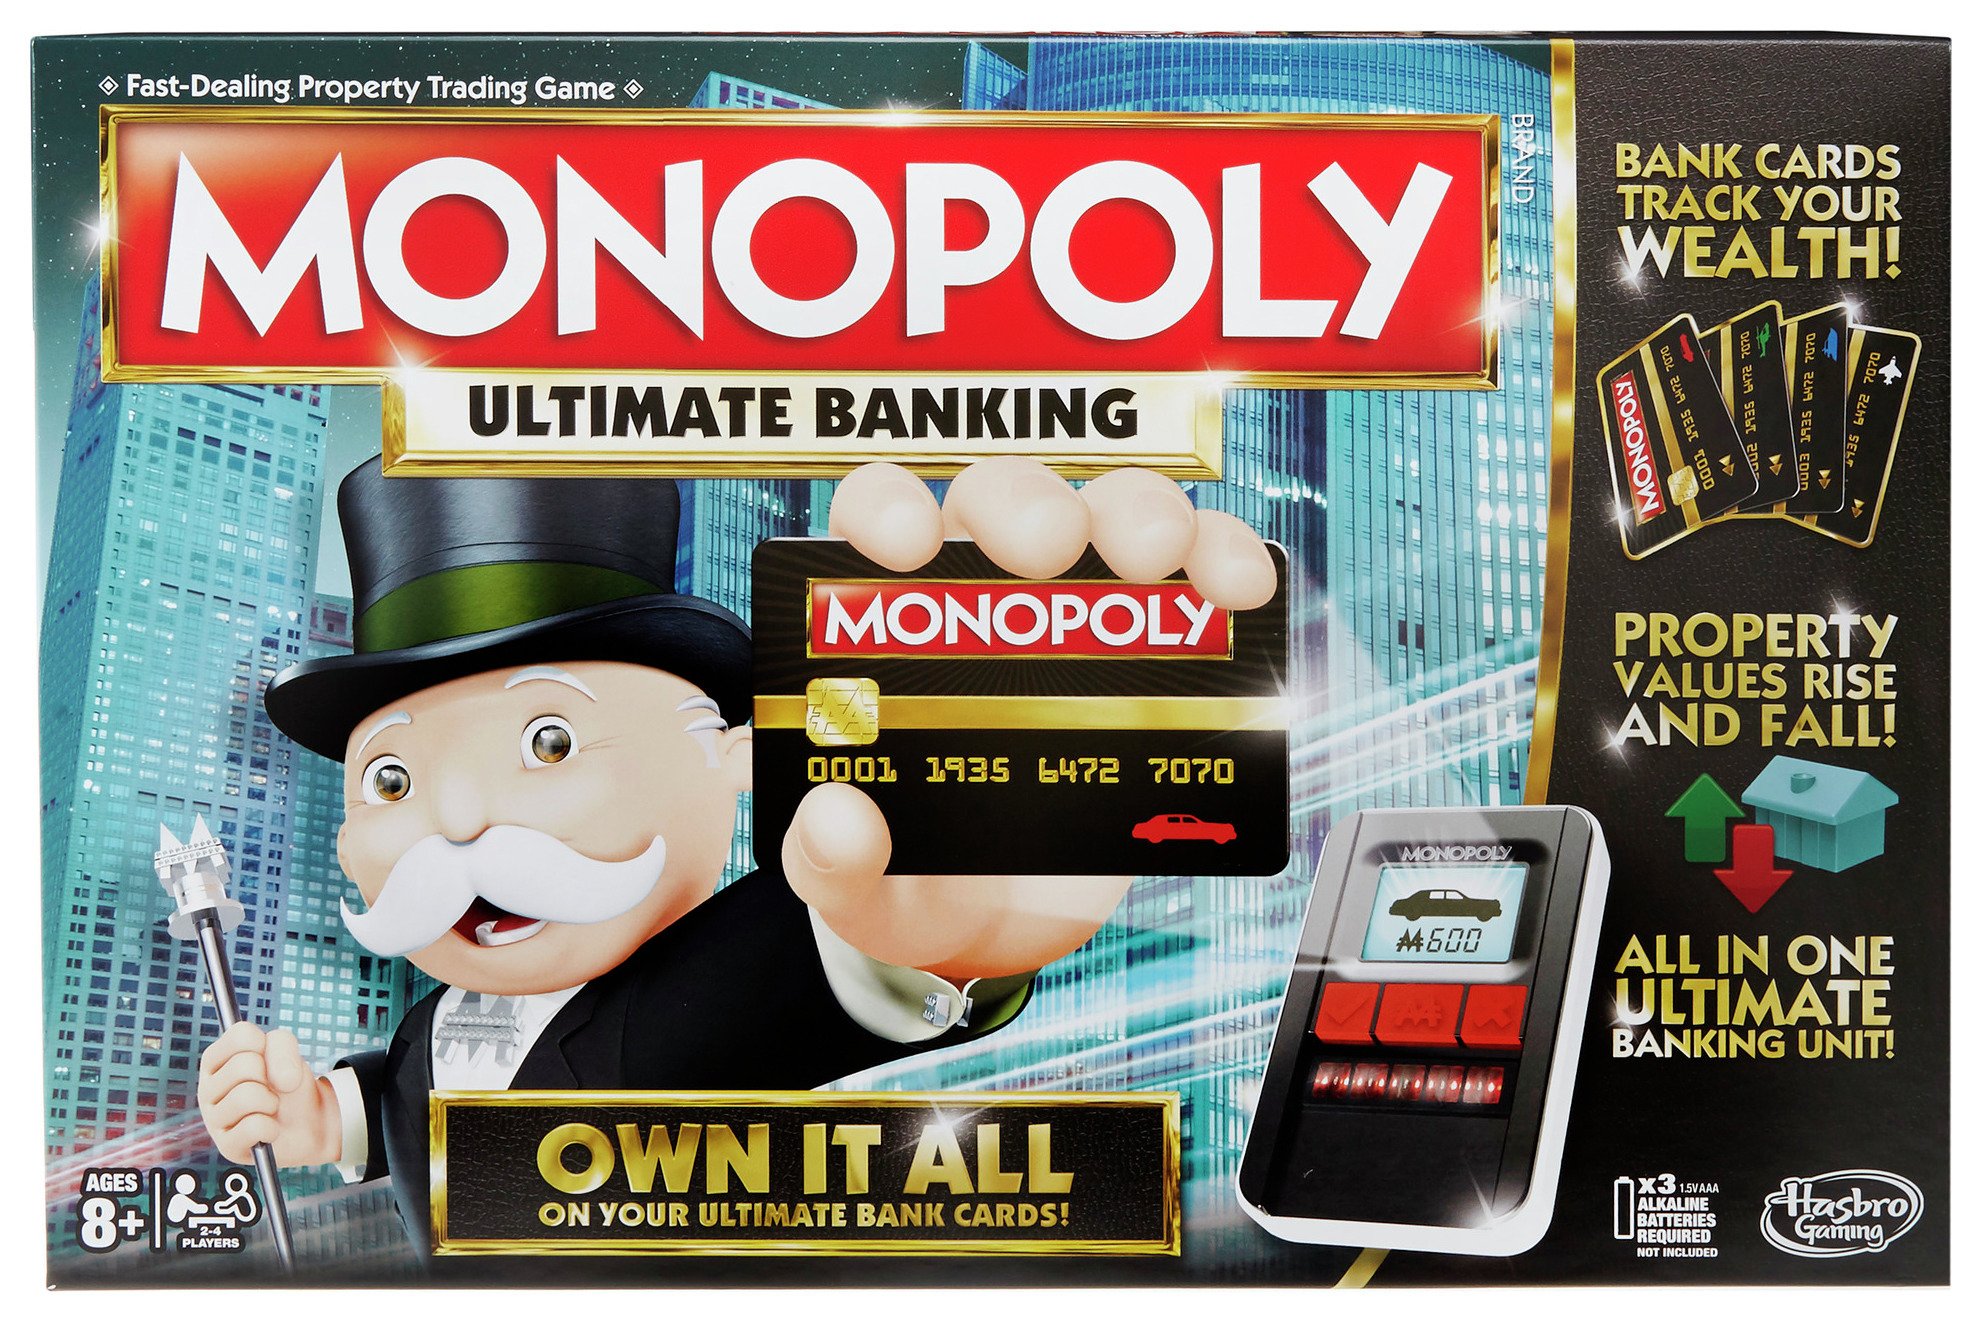 Monopoly Ultimate Banking from Hasbro Gaming